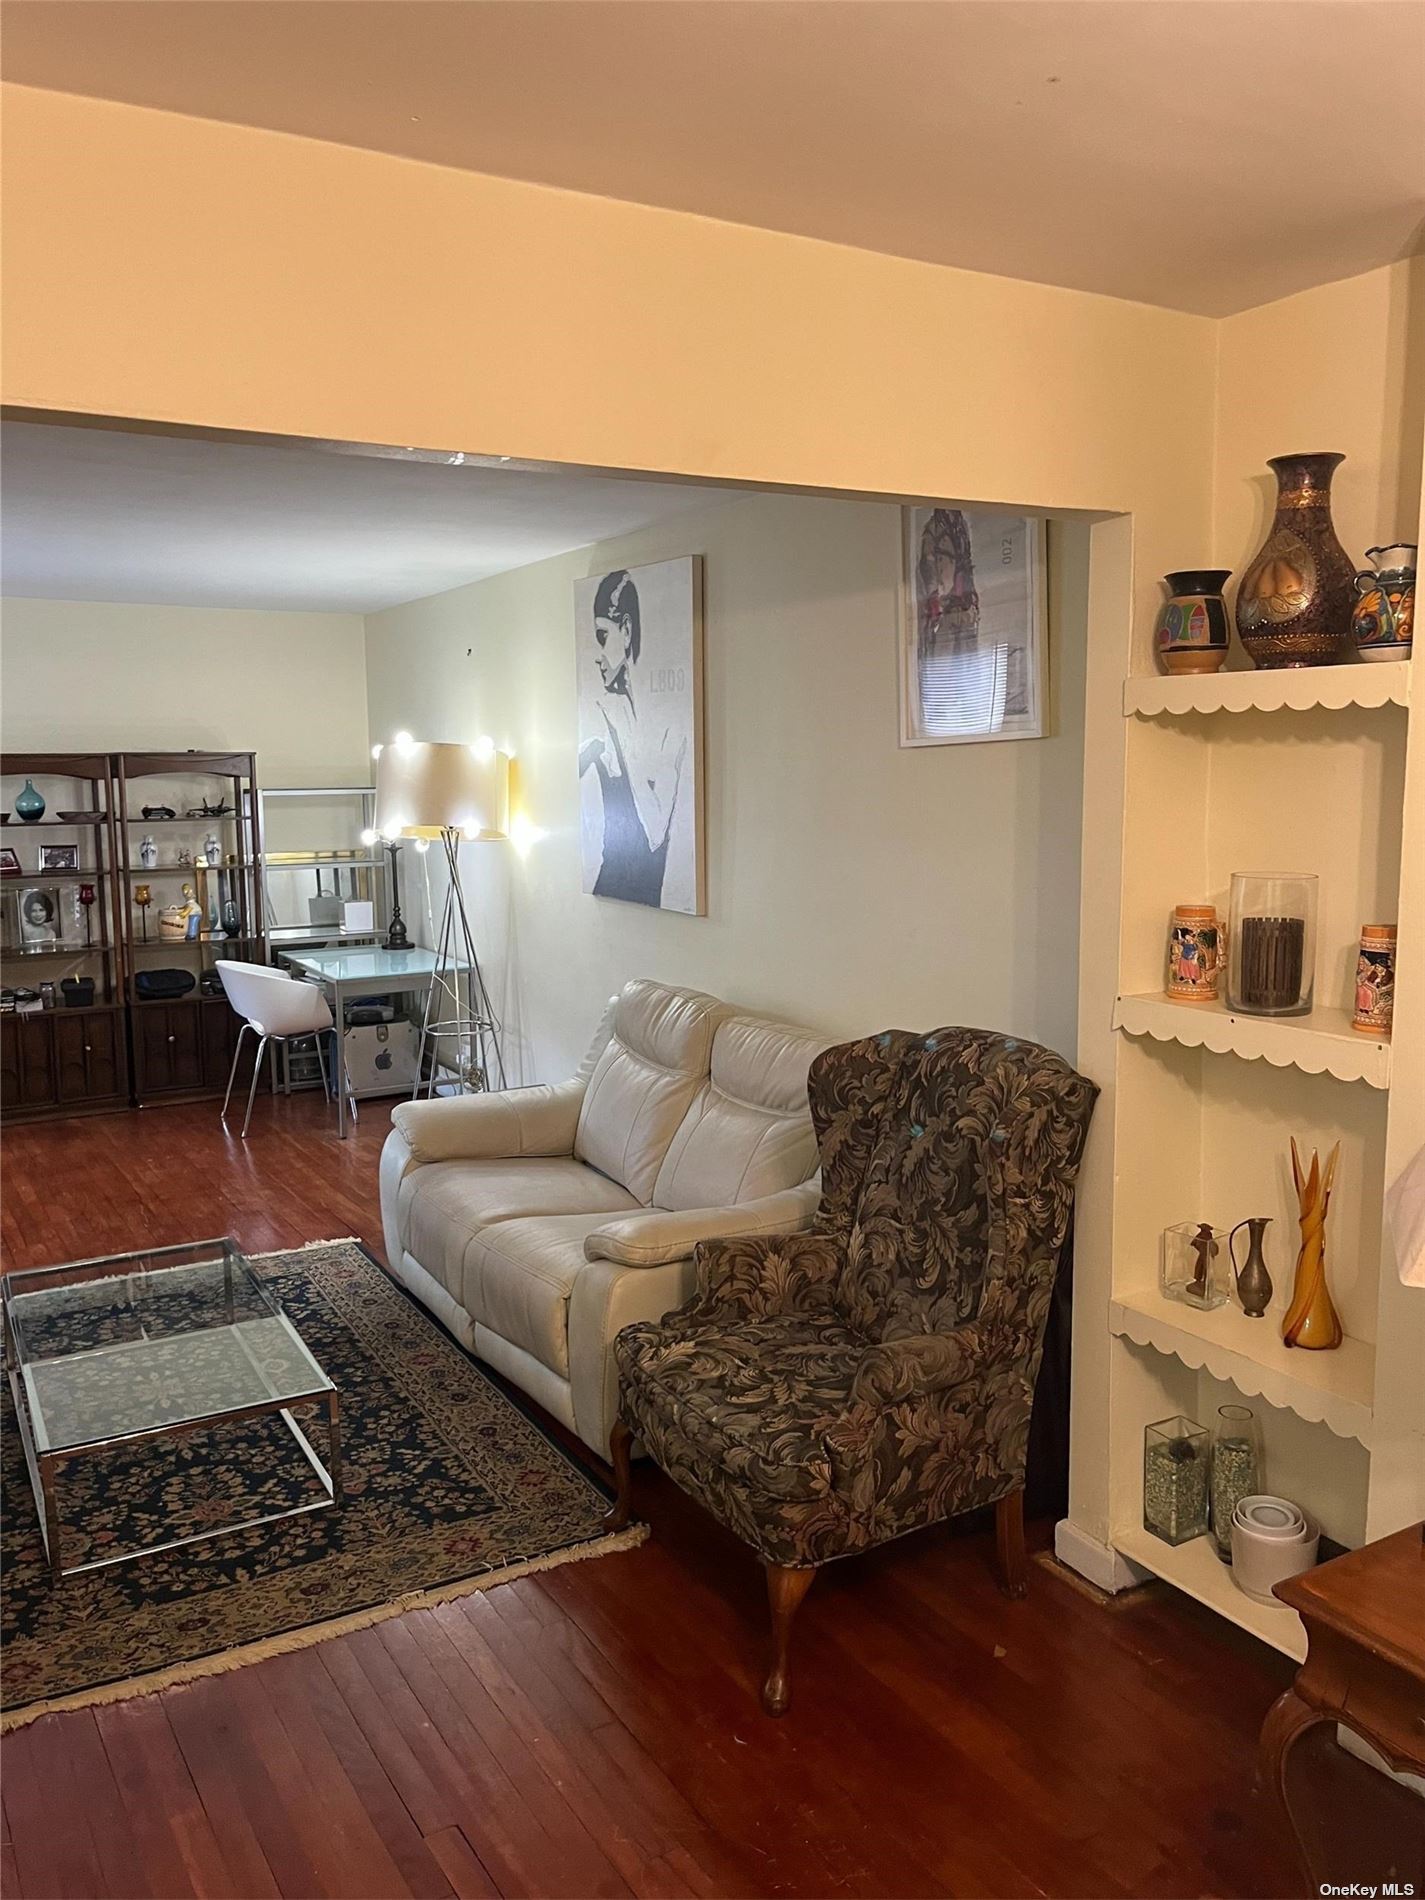 Listing in Jackson Heights, NY